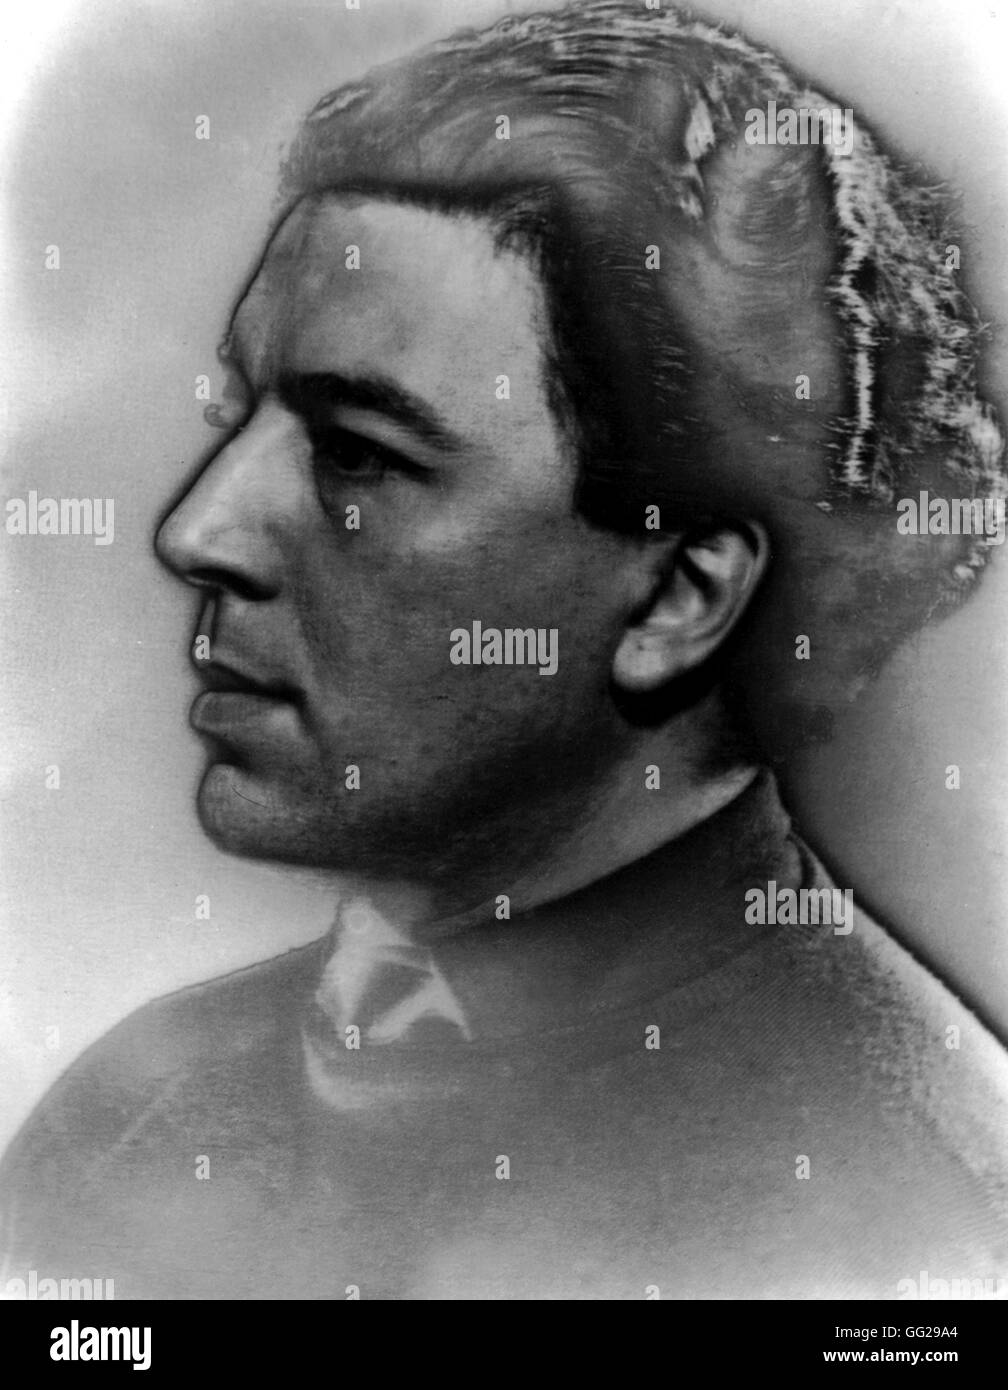 Portrait of André Breton in 1929. Photograph by Man Ray 20th century France Stock Photo